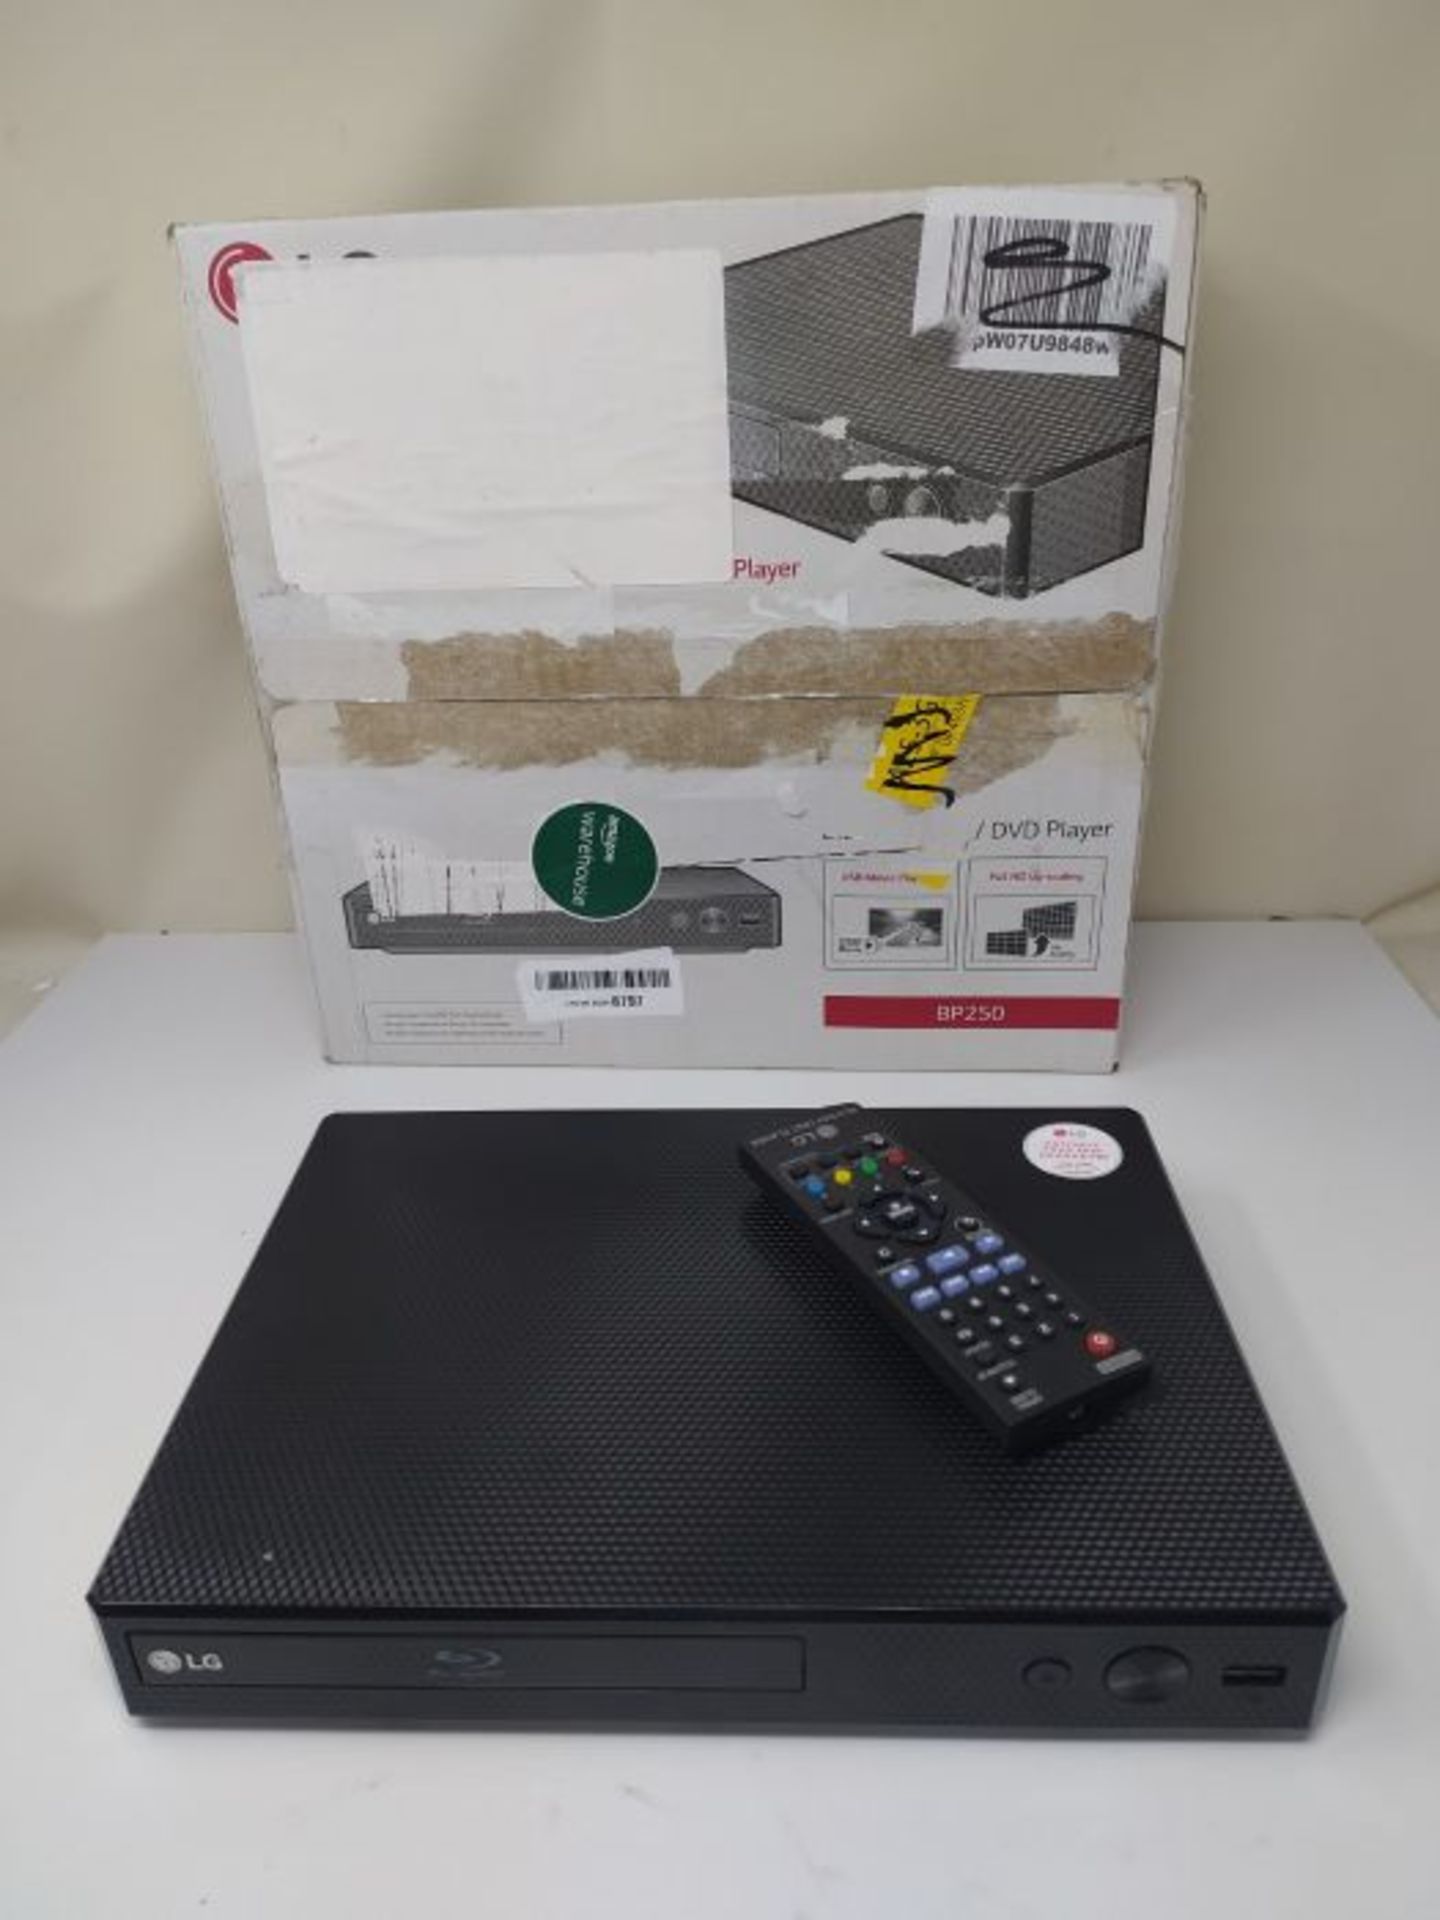 RRP £50.00 LG BP250 DGBRLLK Blu-Ray and DVD Disc Player with Full HD Up-scaling and external HDD - Image 4 of 4